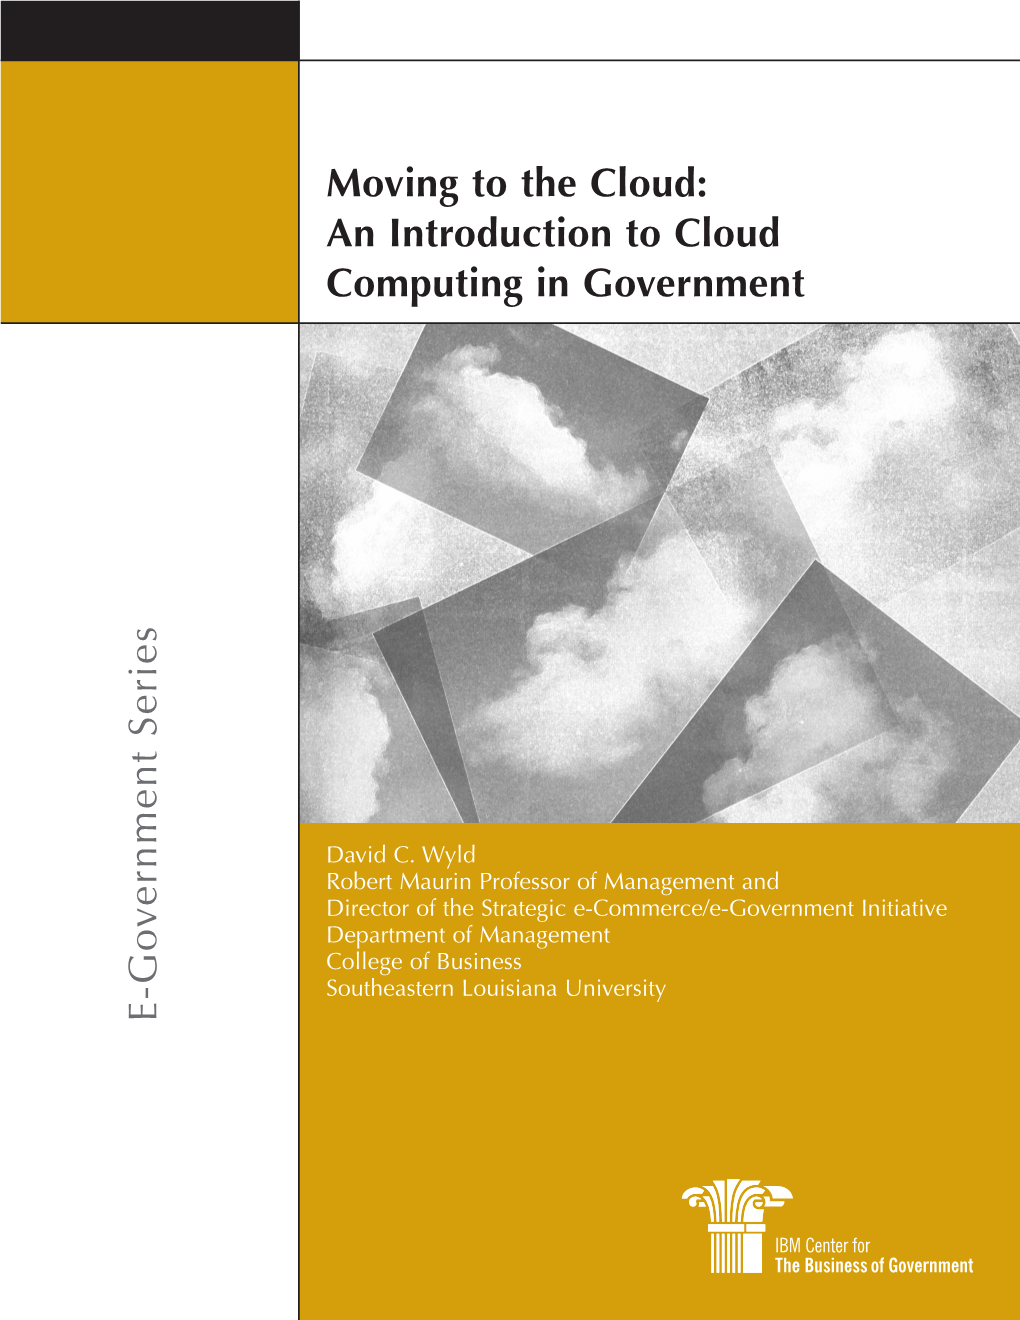 An Introduction to Cloud Computing in Government